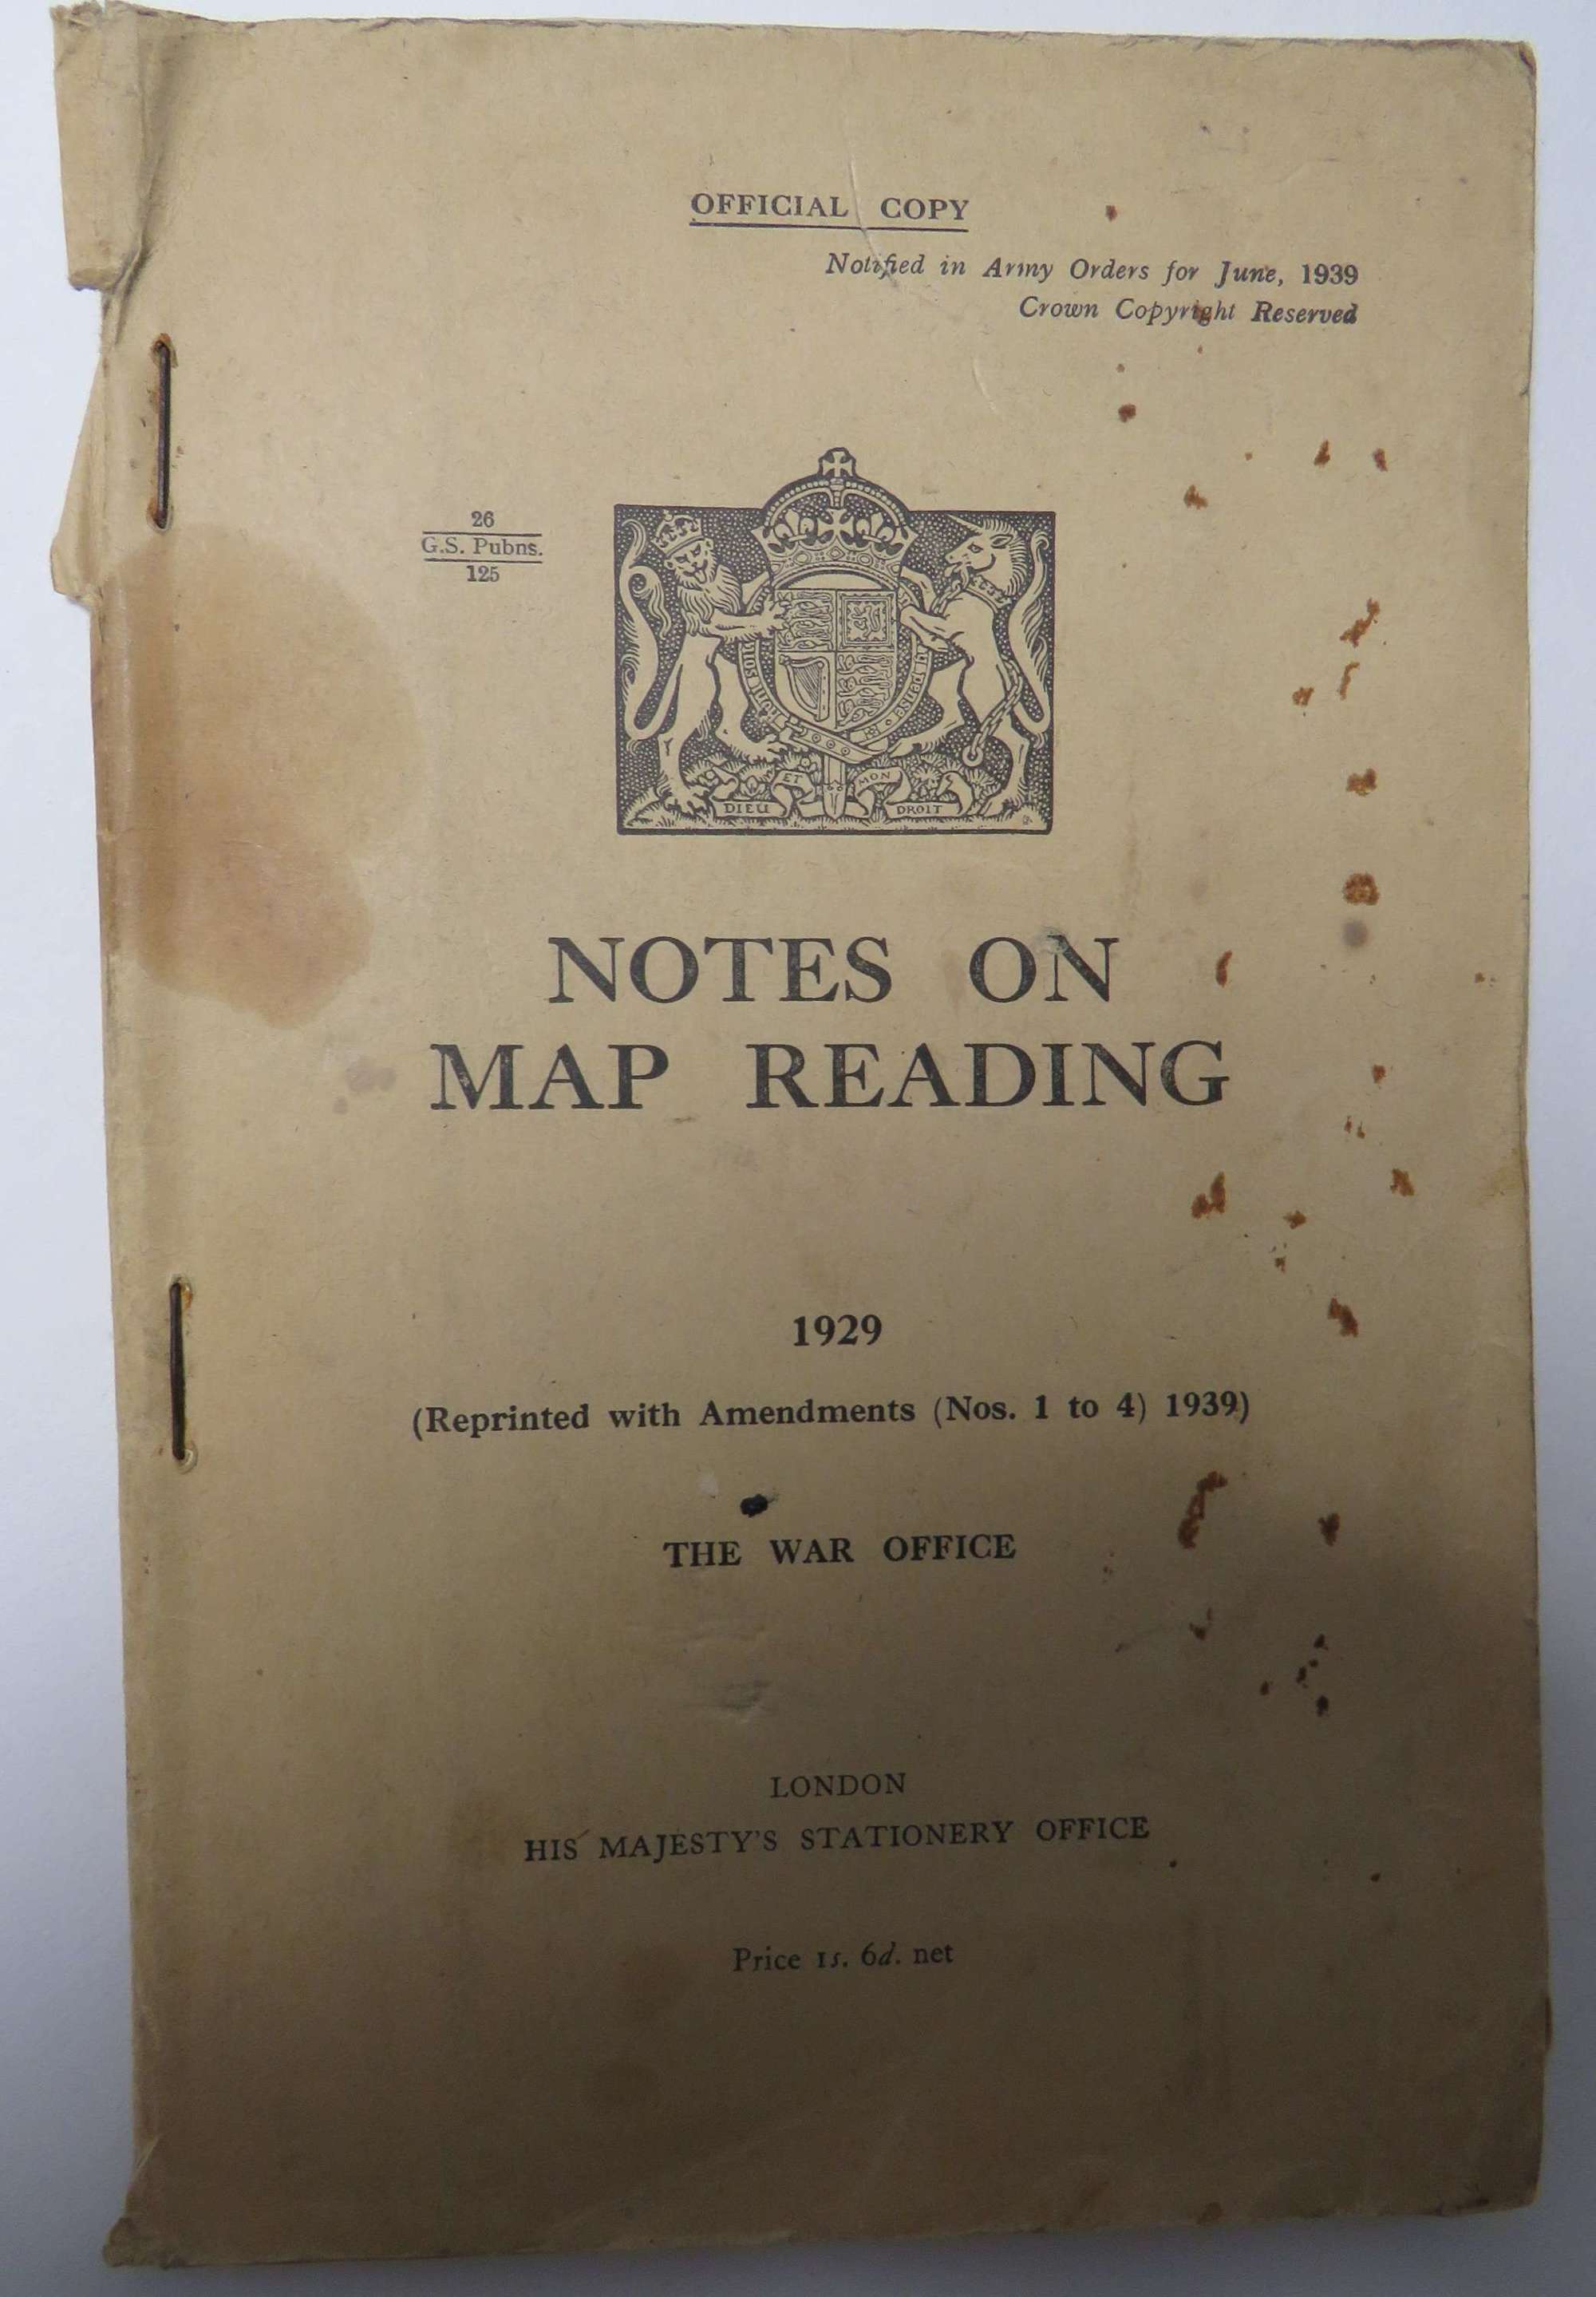 1929 Manual on Map Reading